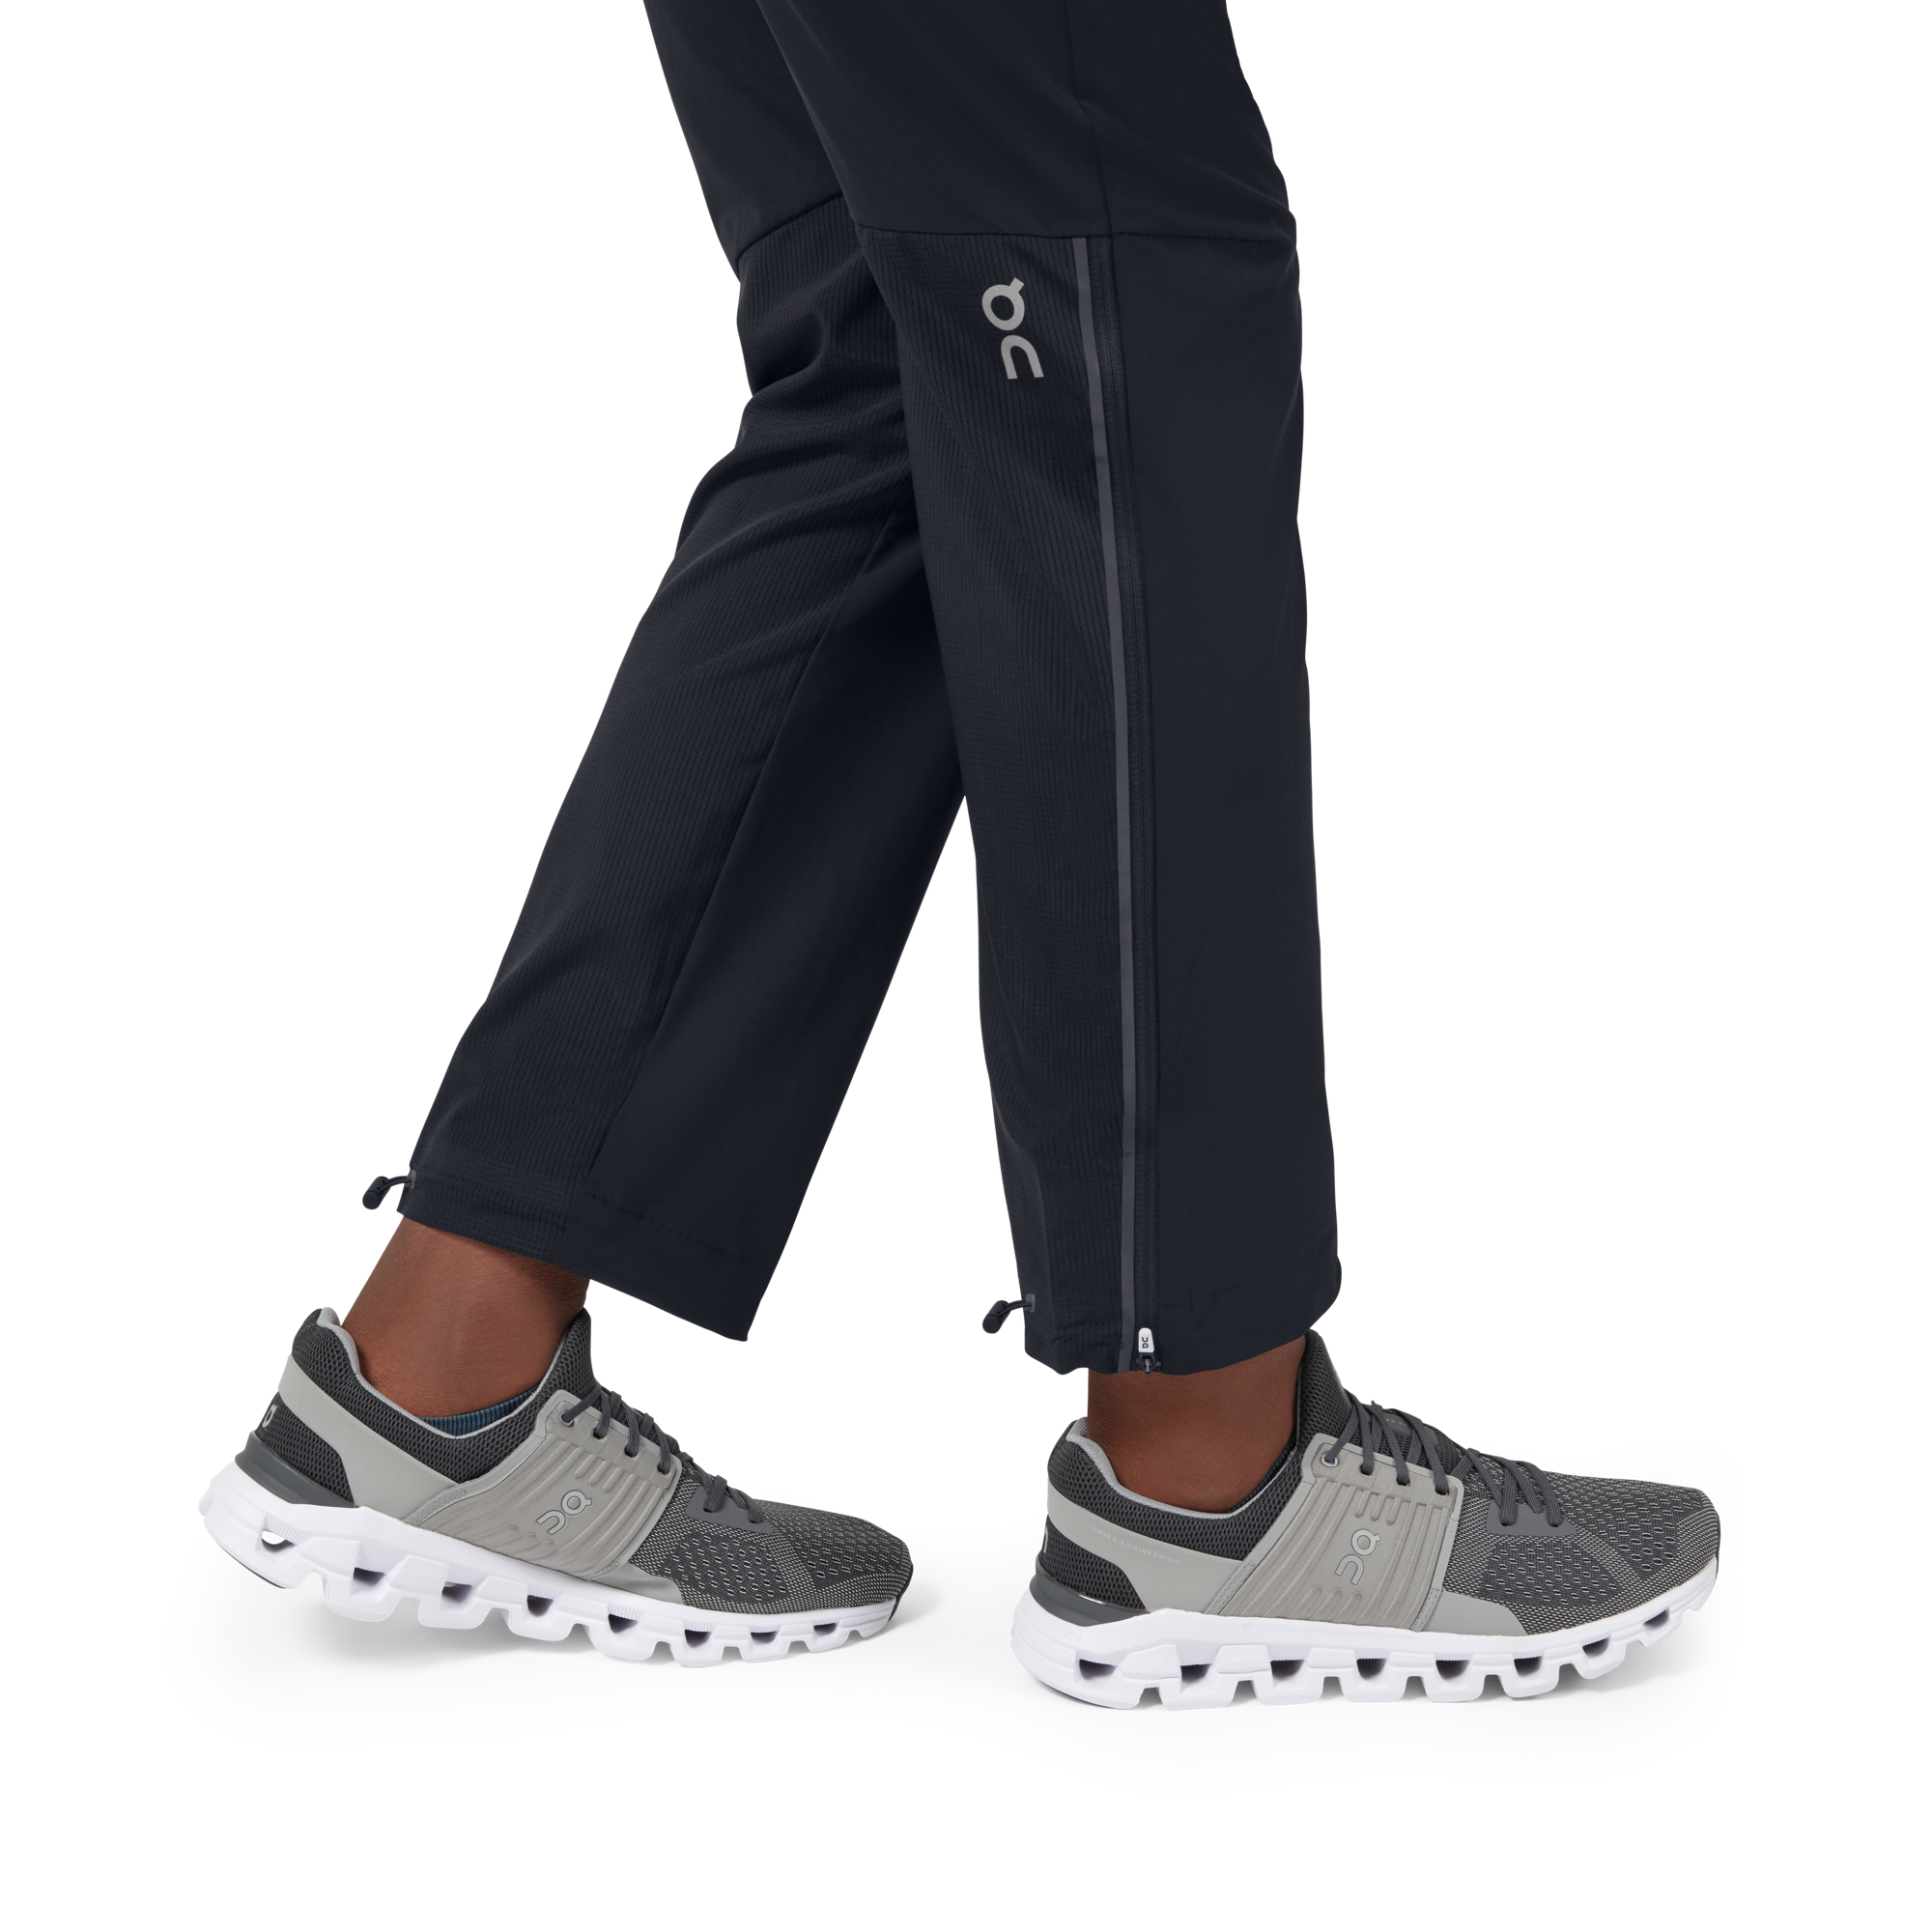 Relaxed Go-Dry Track Pants for Girls